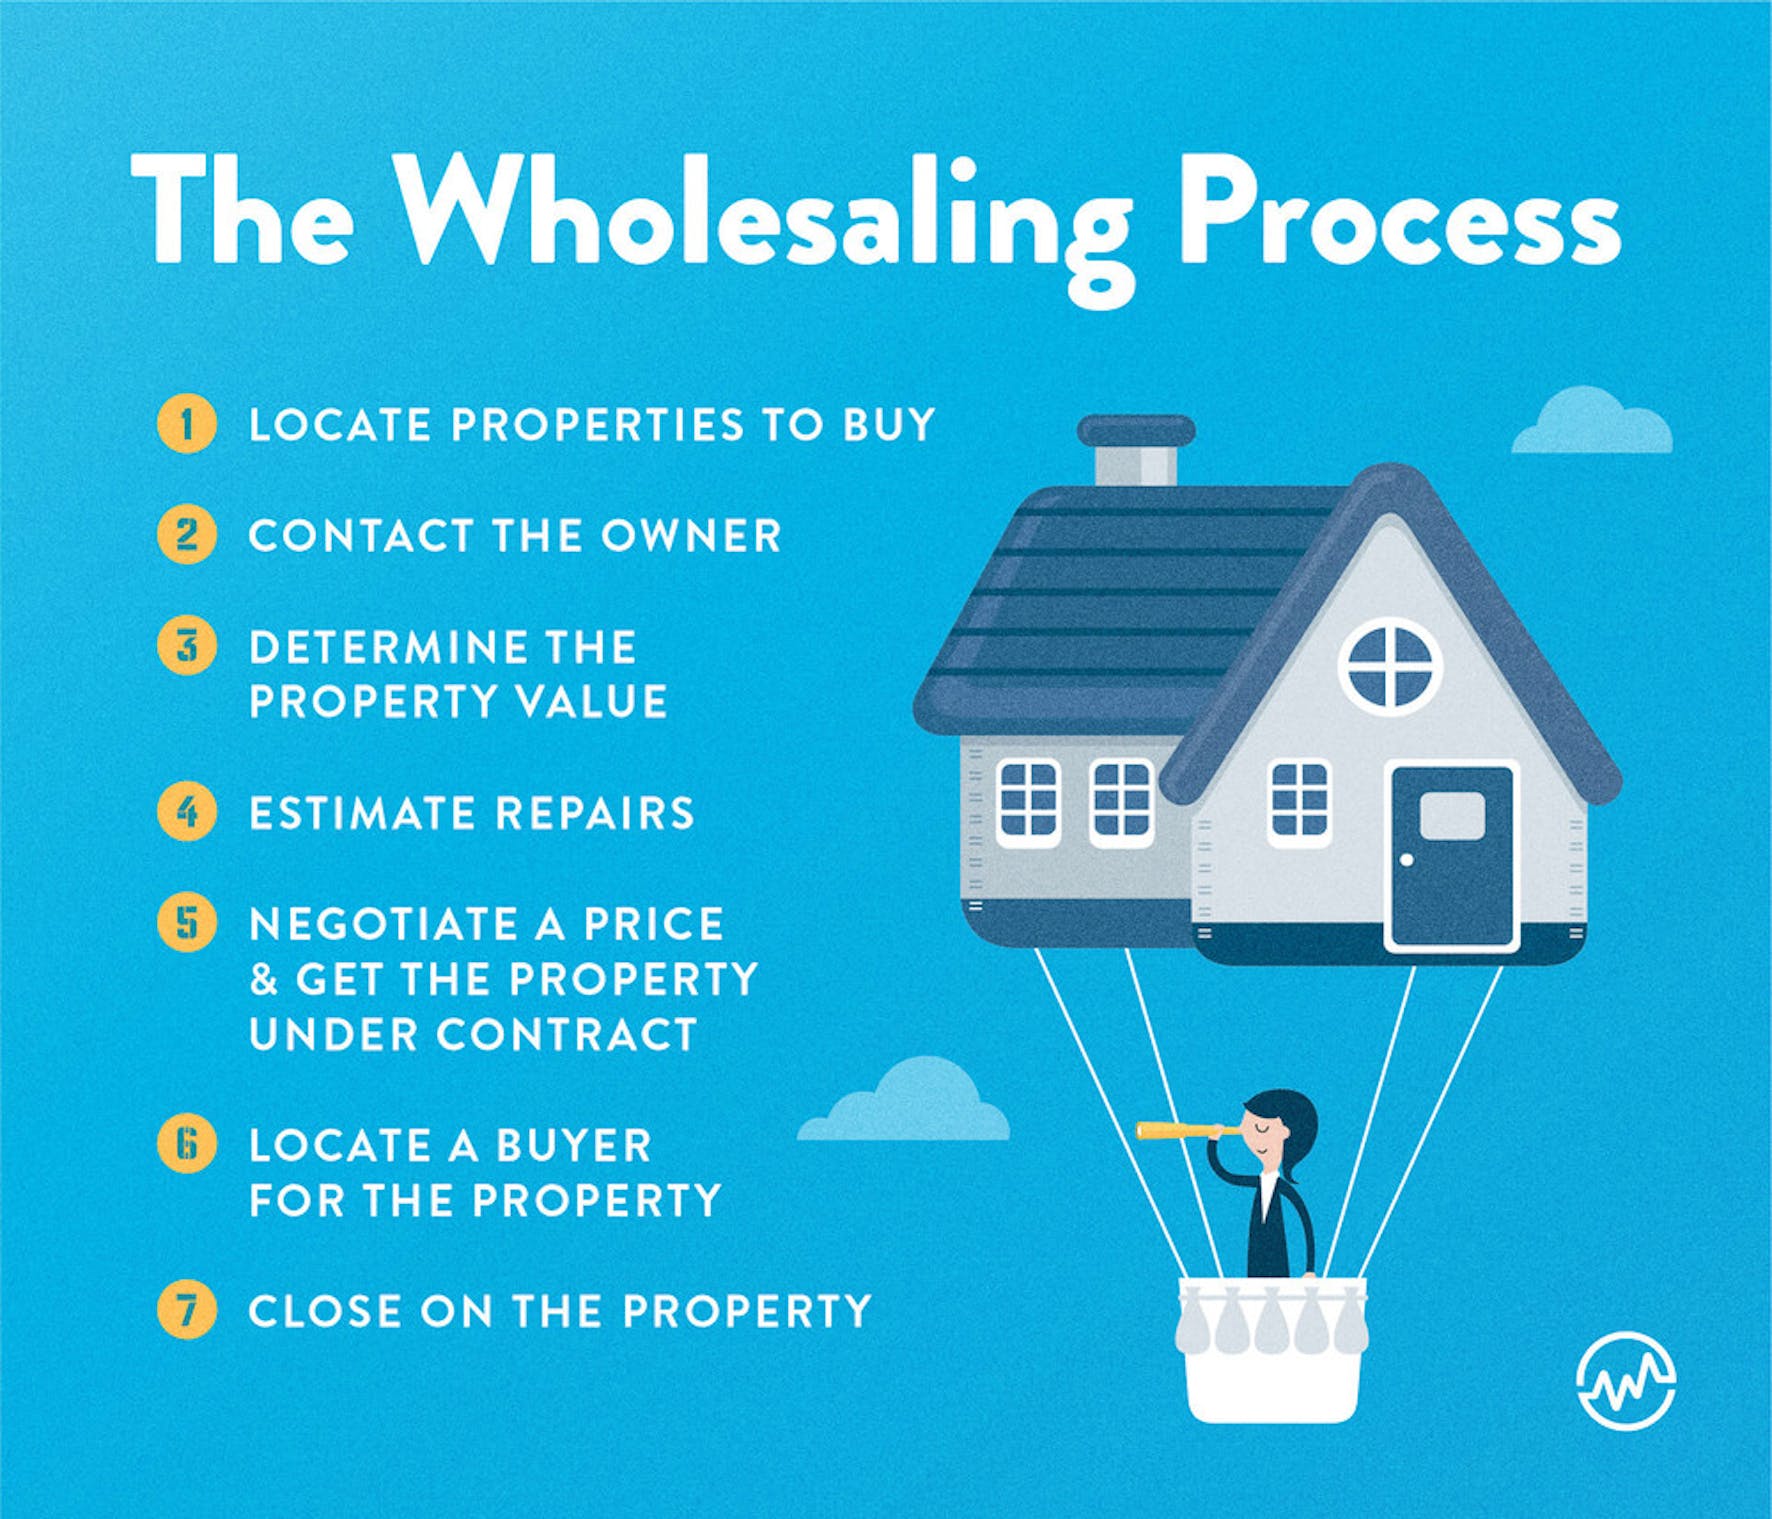 How much do wholesale real estate make